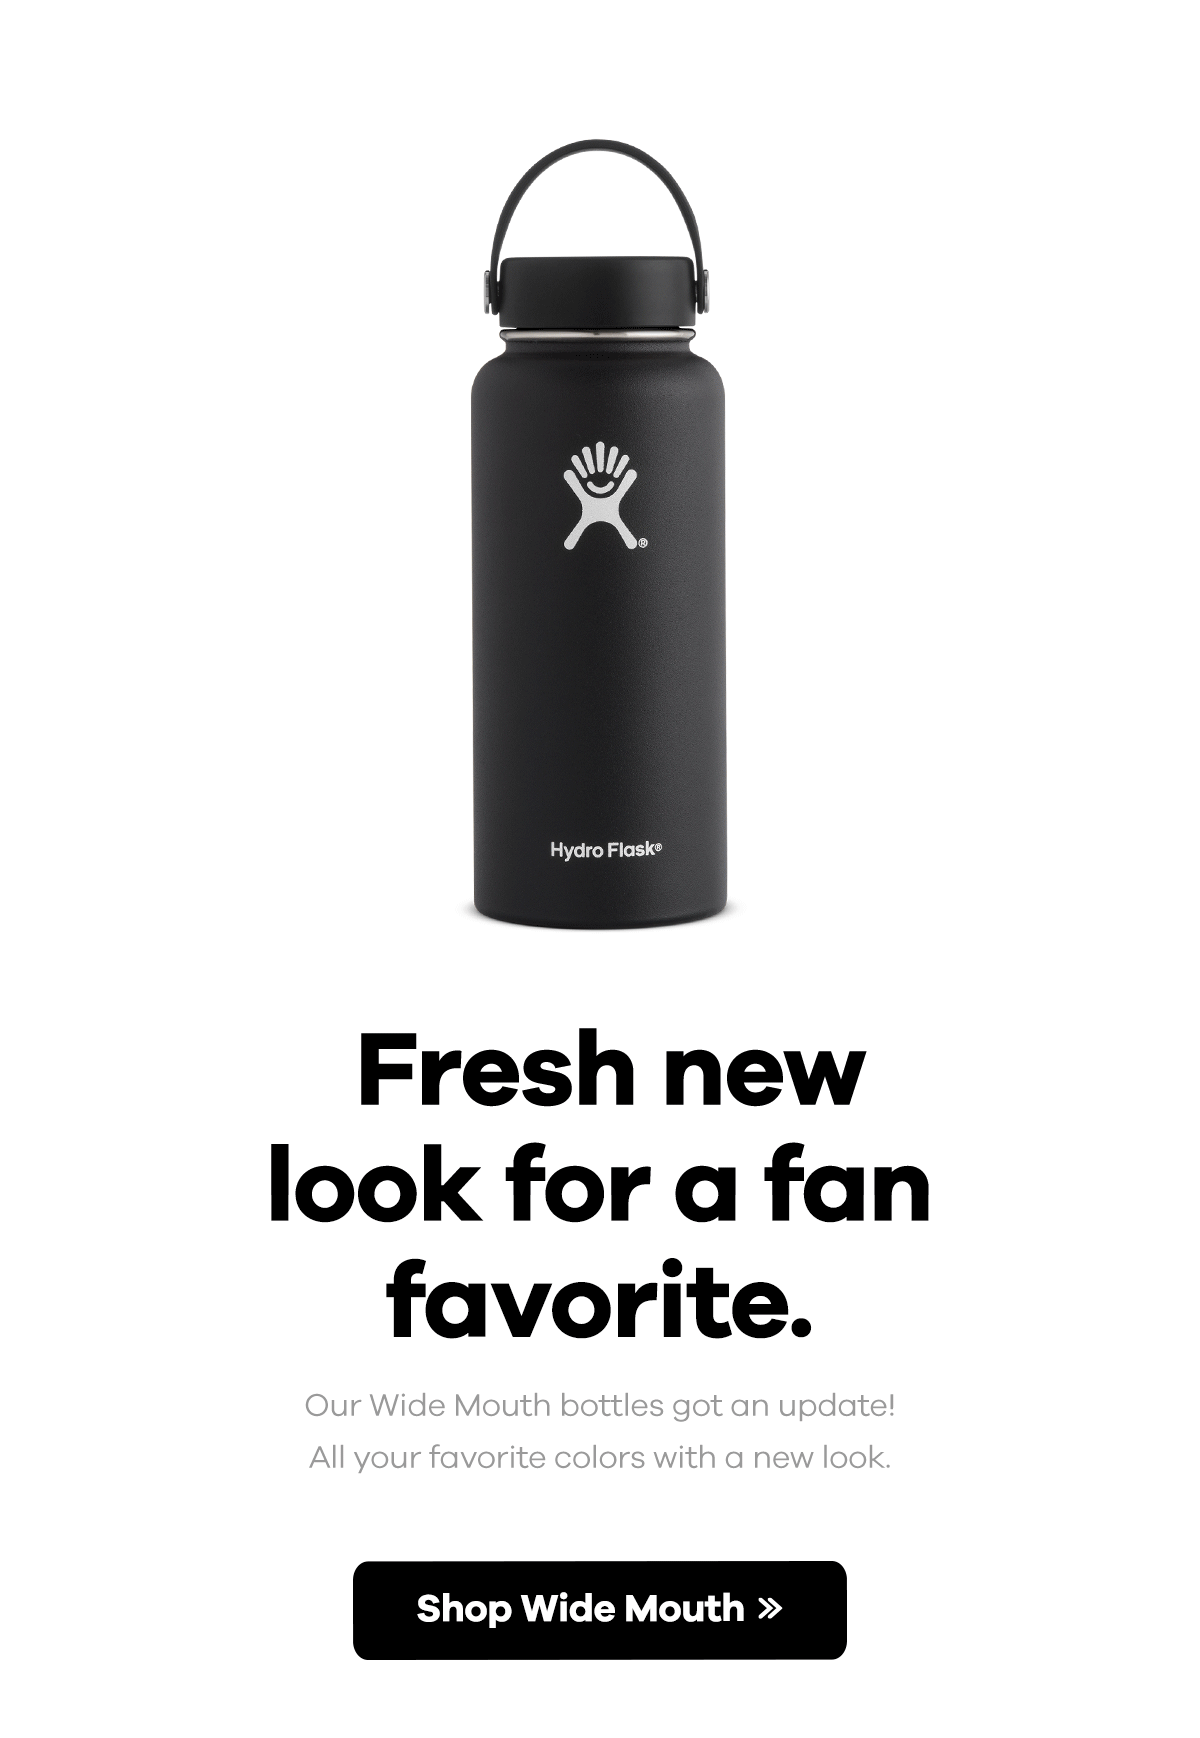 Fresh new look for a fan favorite. Our Wide Mouth bottles got an update! All your favorite colors with a new look. | Shop Wide Mouth >>